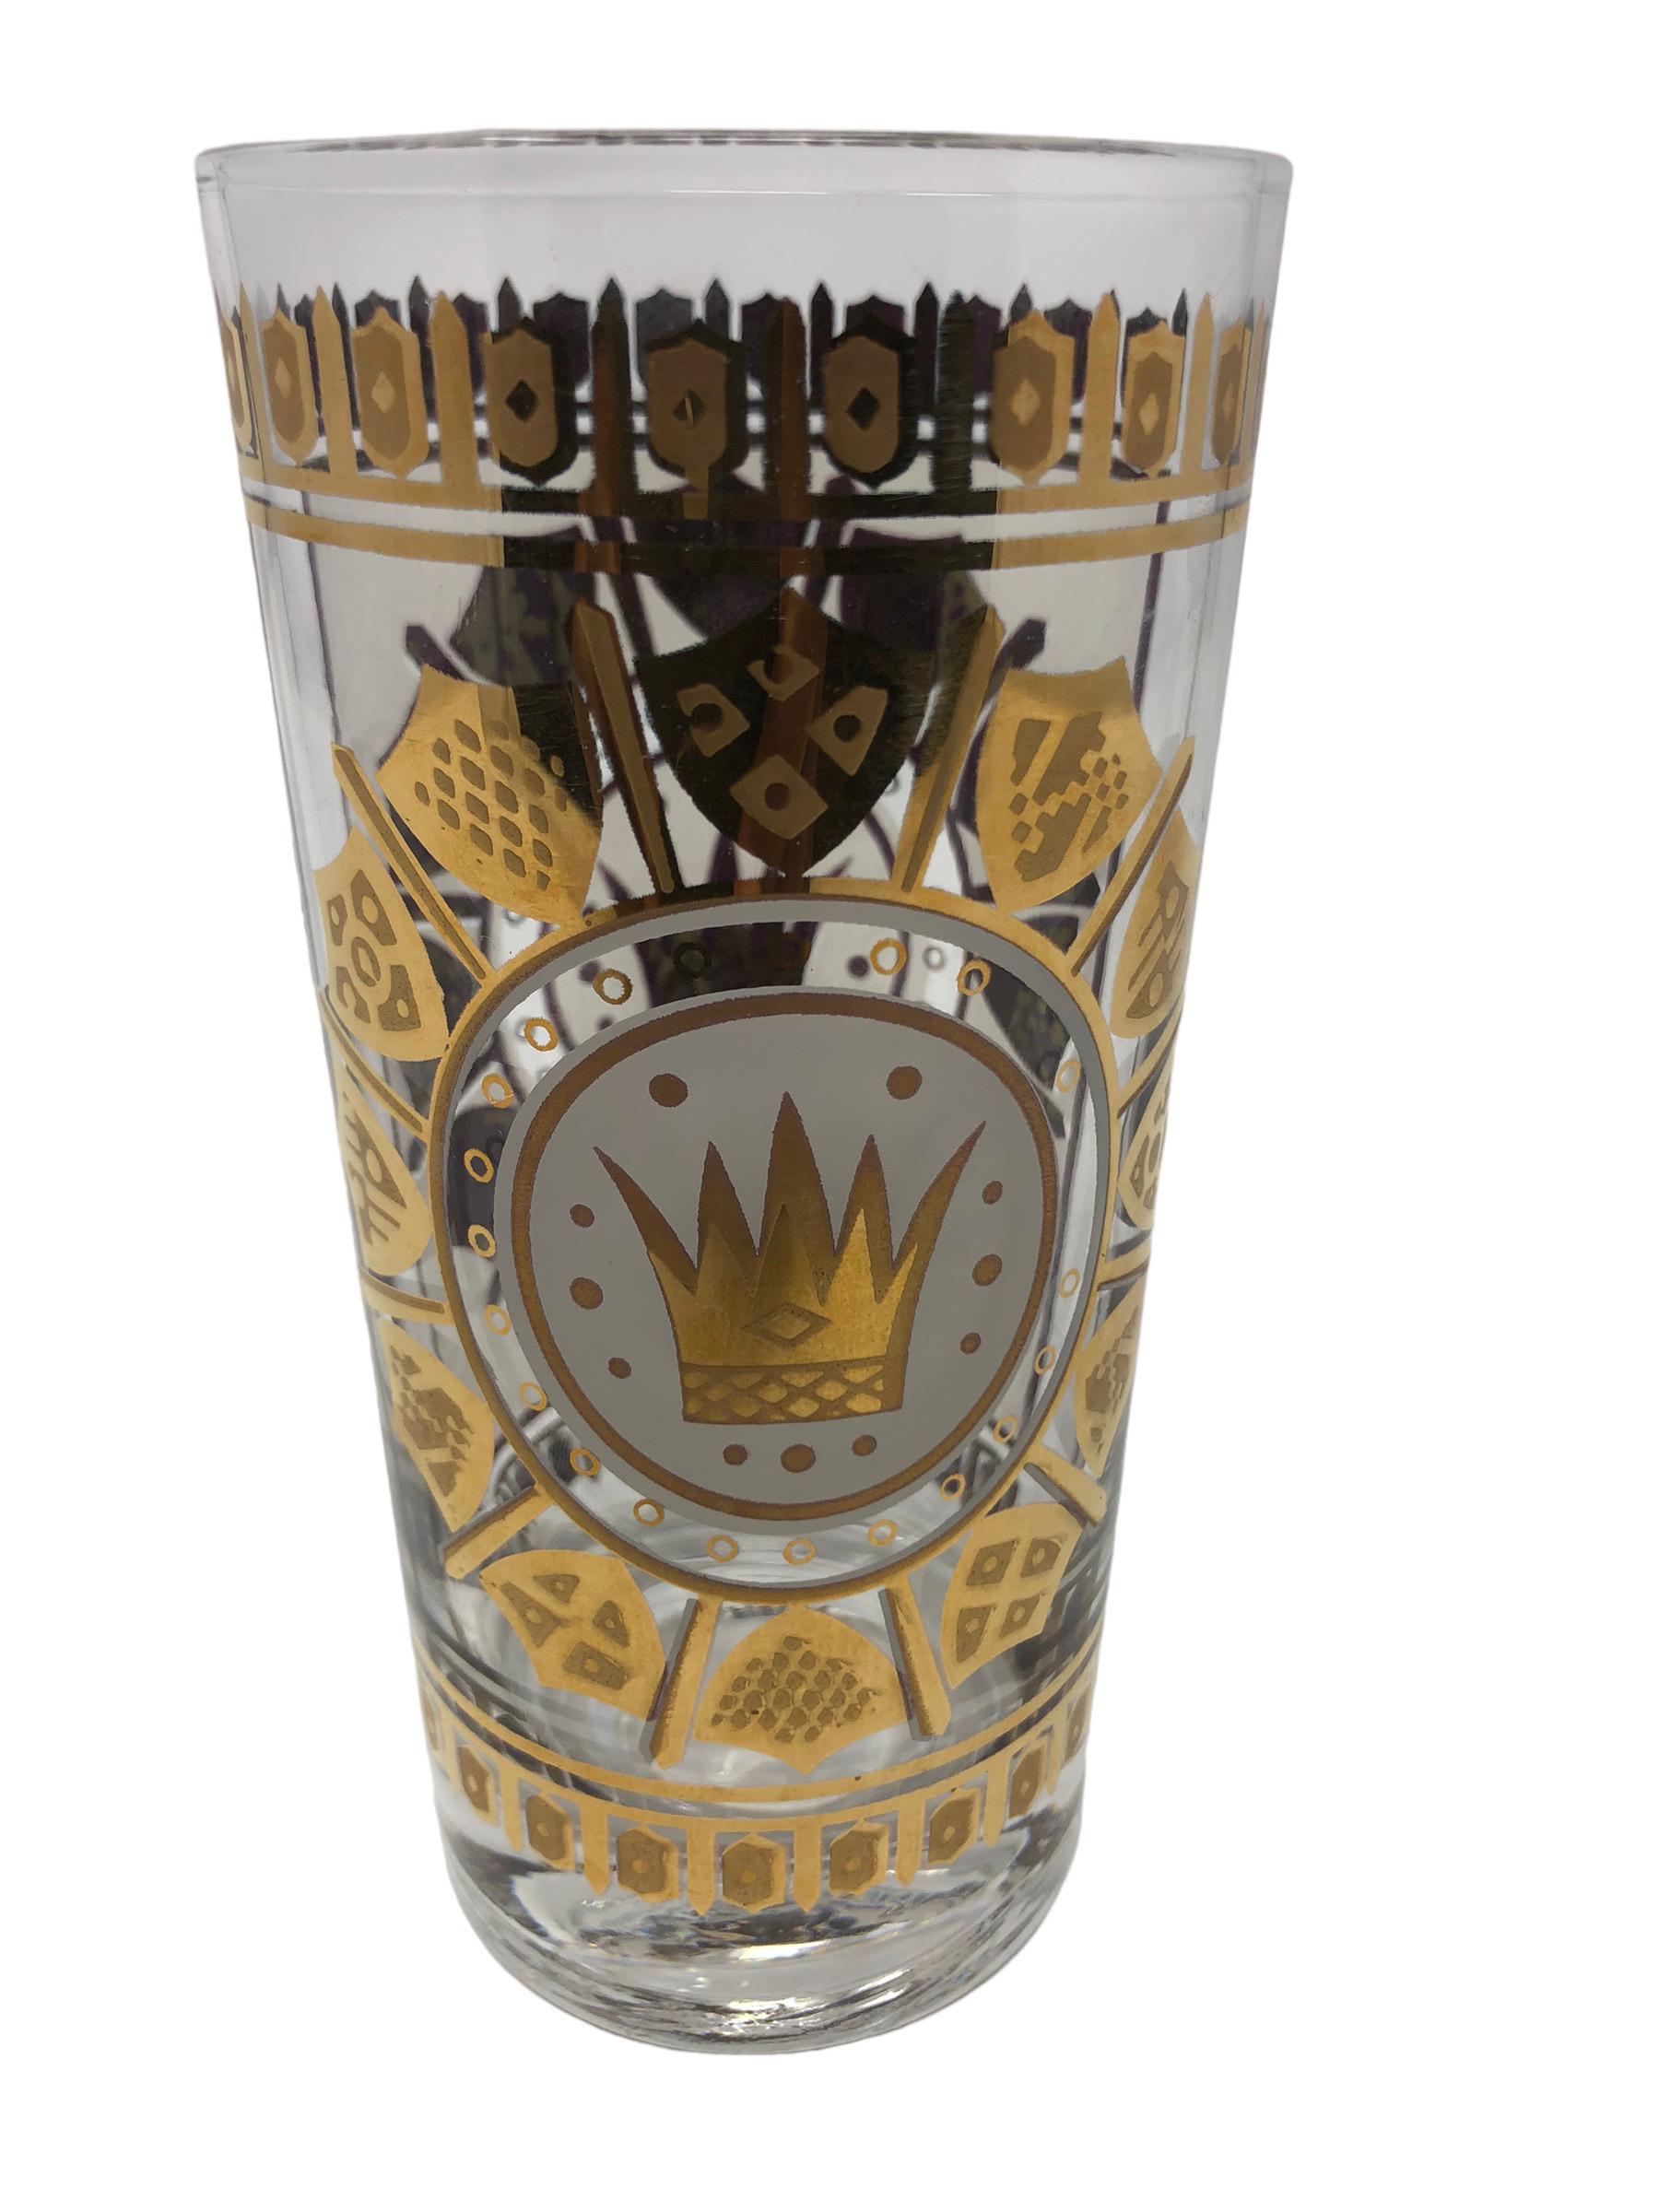 Gold Set of 6 Highball Glasses with Crowns and Shields Decoration. For Sale